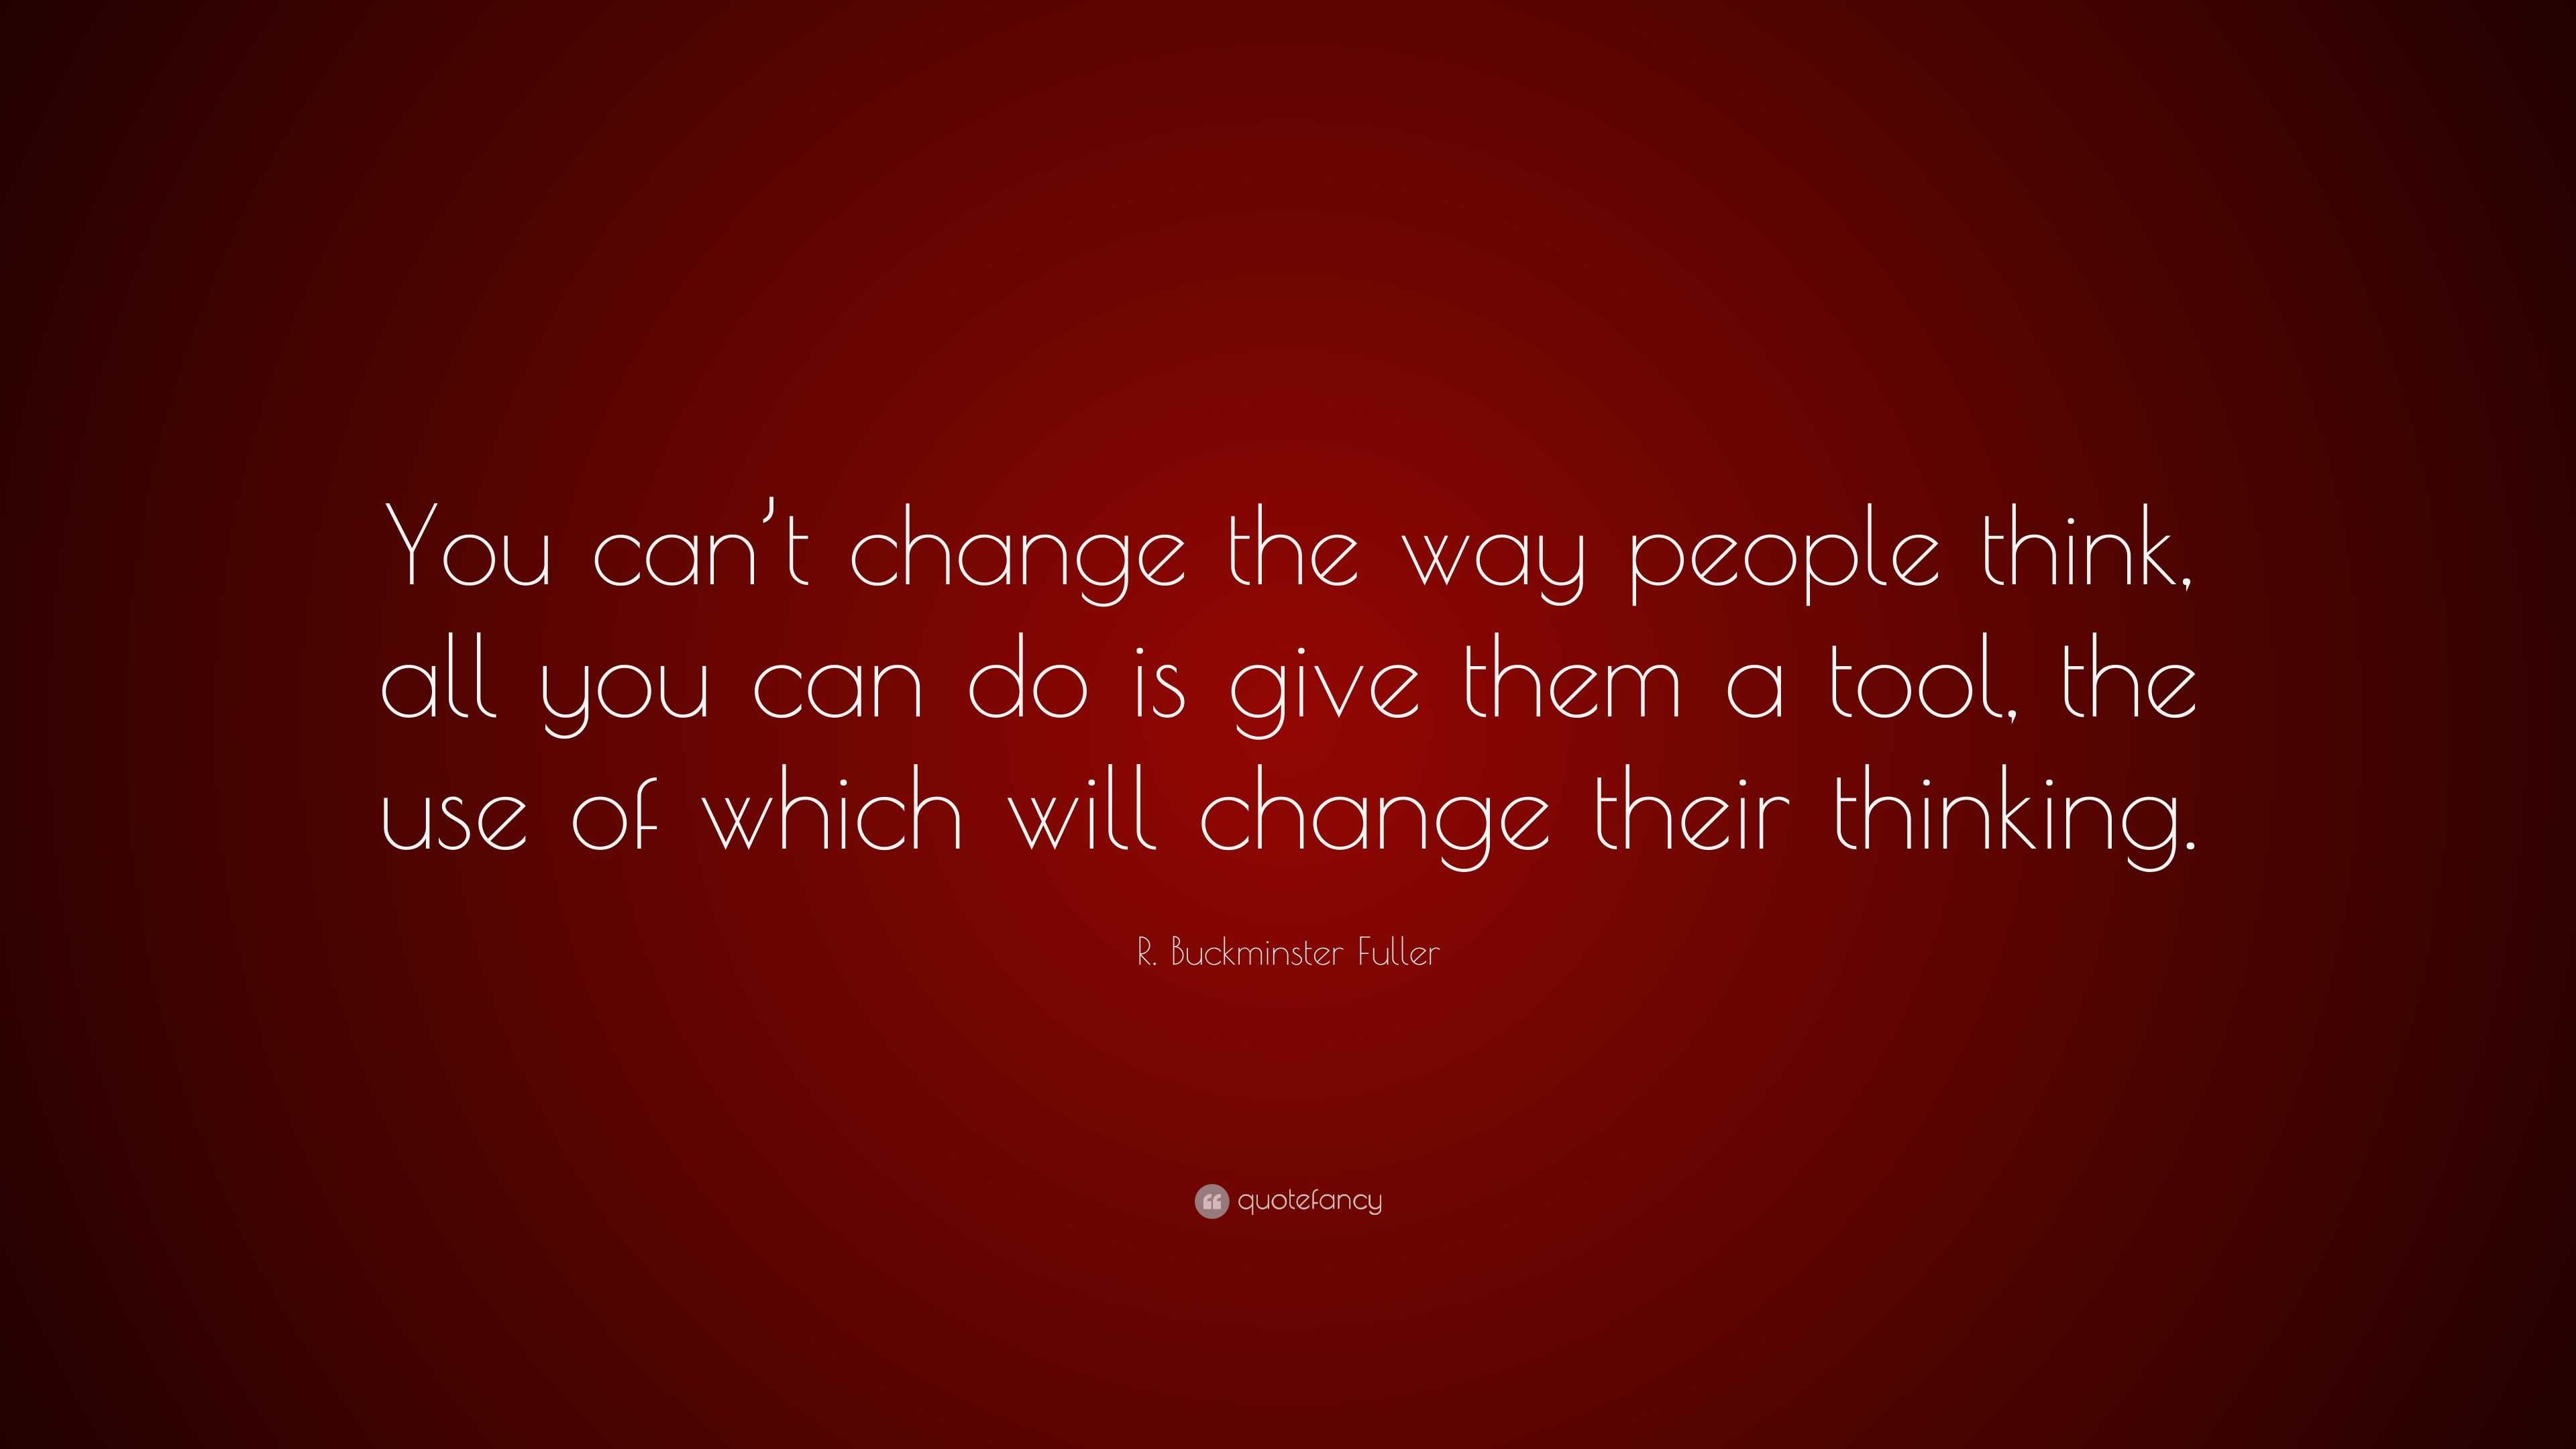 R. Buckminster Fuller Quote: “You can’t change the way people think ...